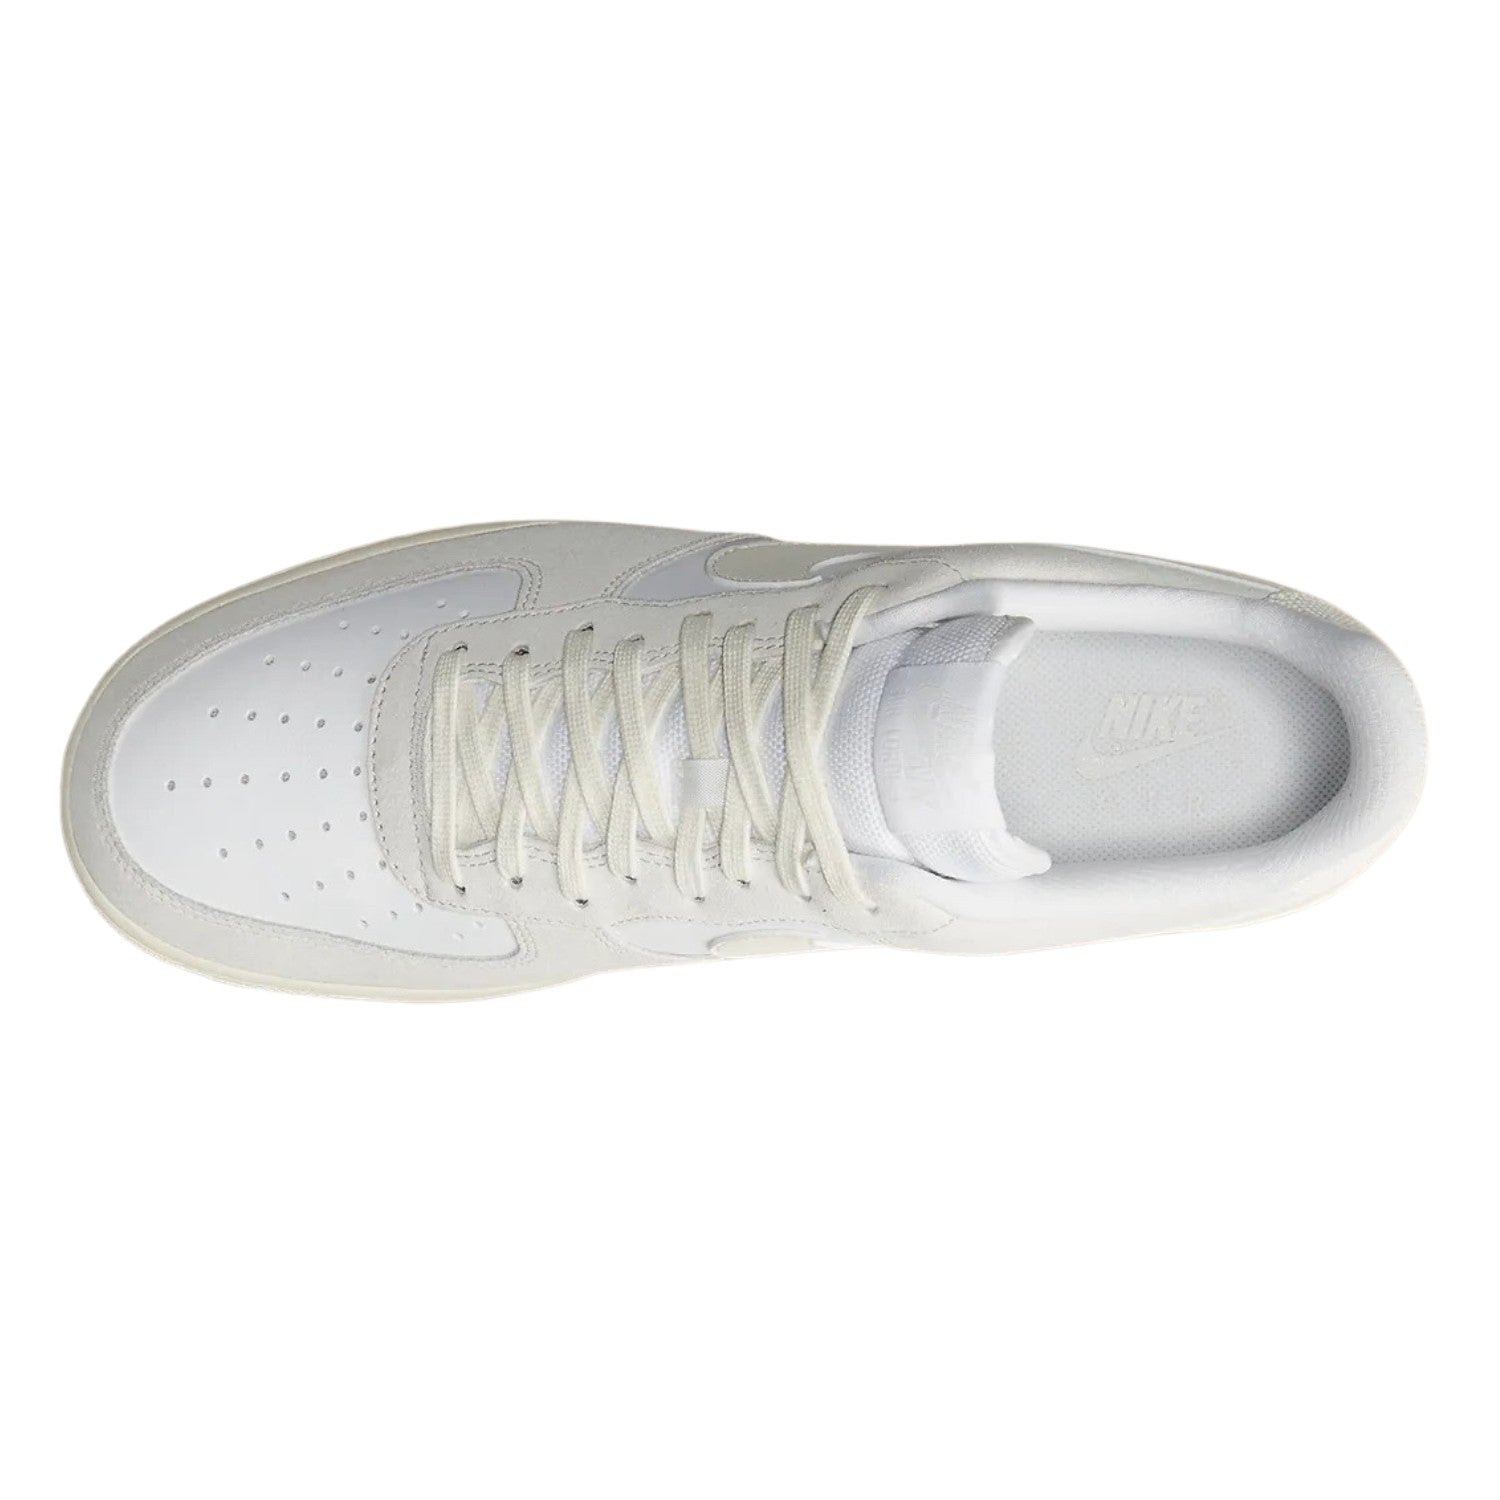 Nike Air Force 1 Lv8 Mens Style : Cw7584